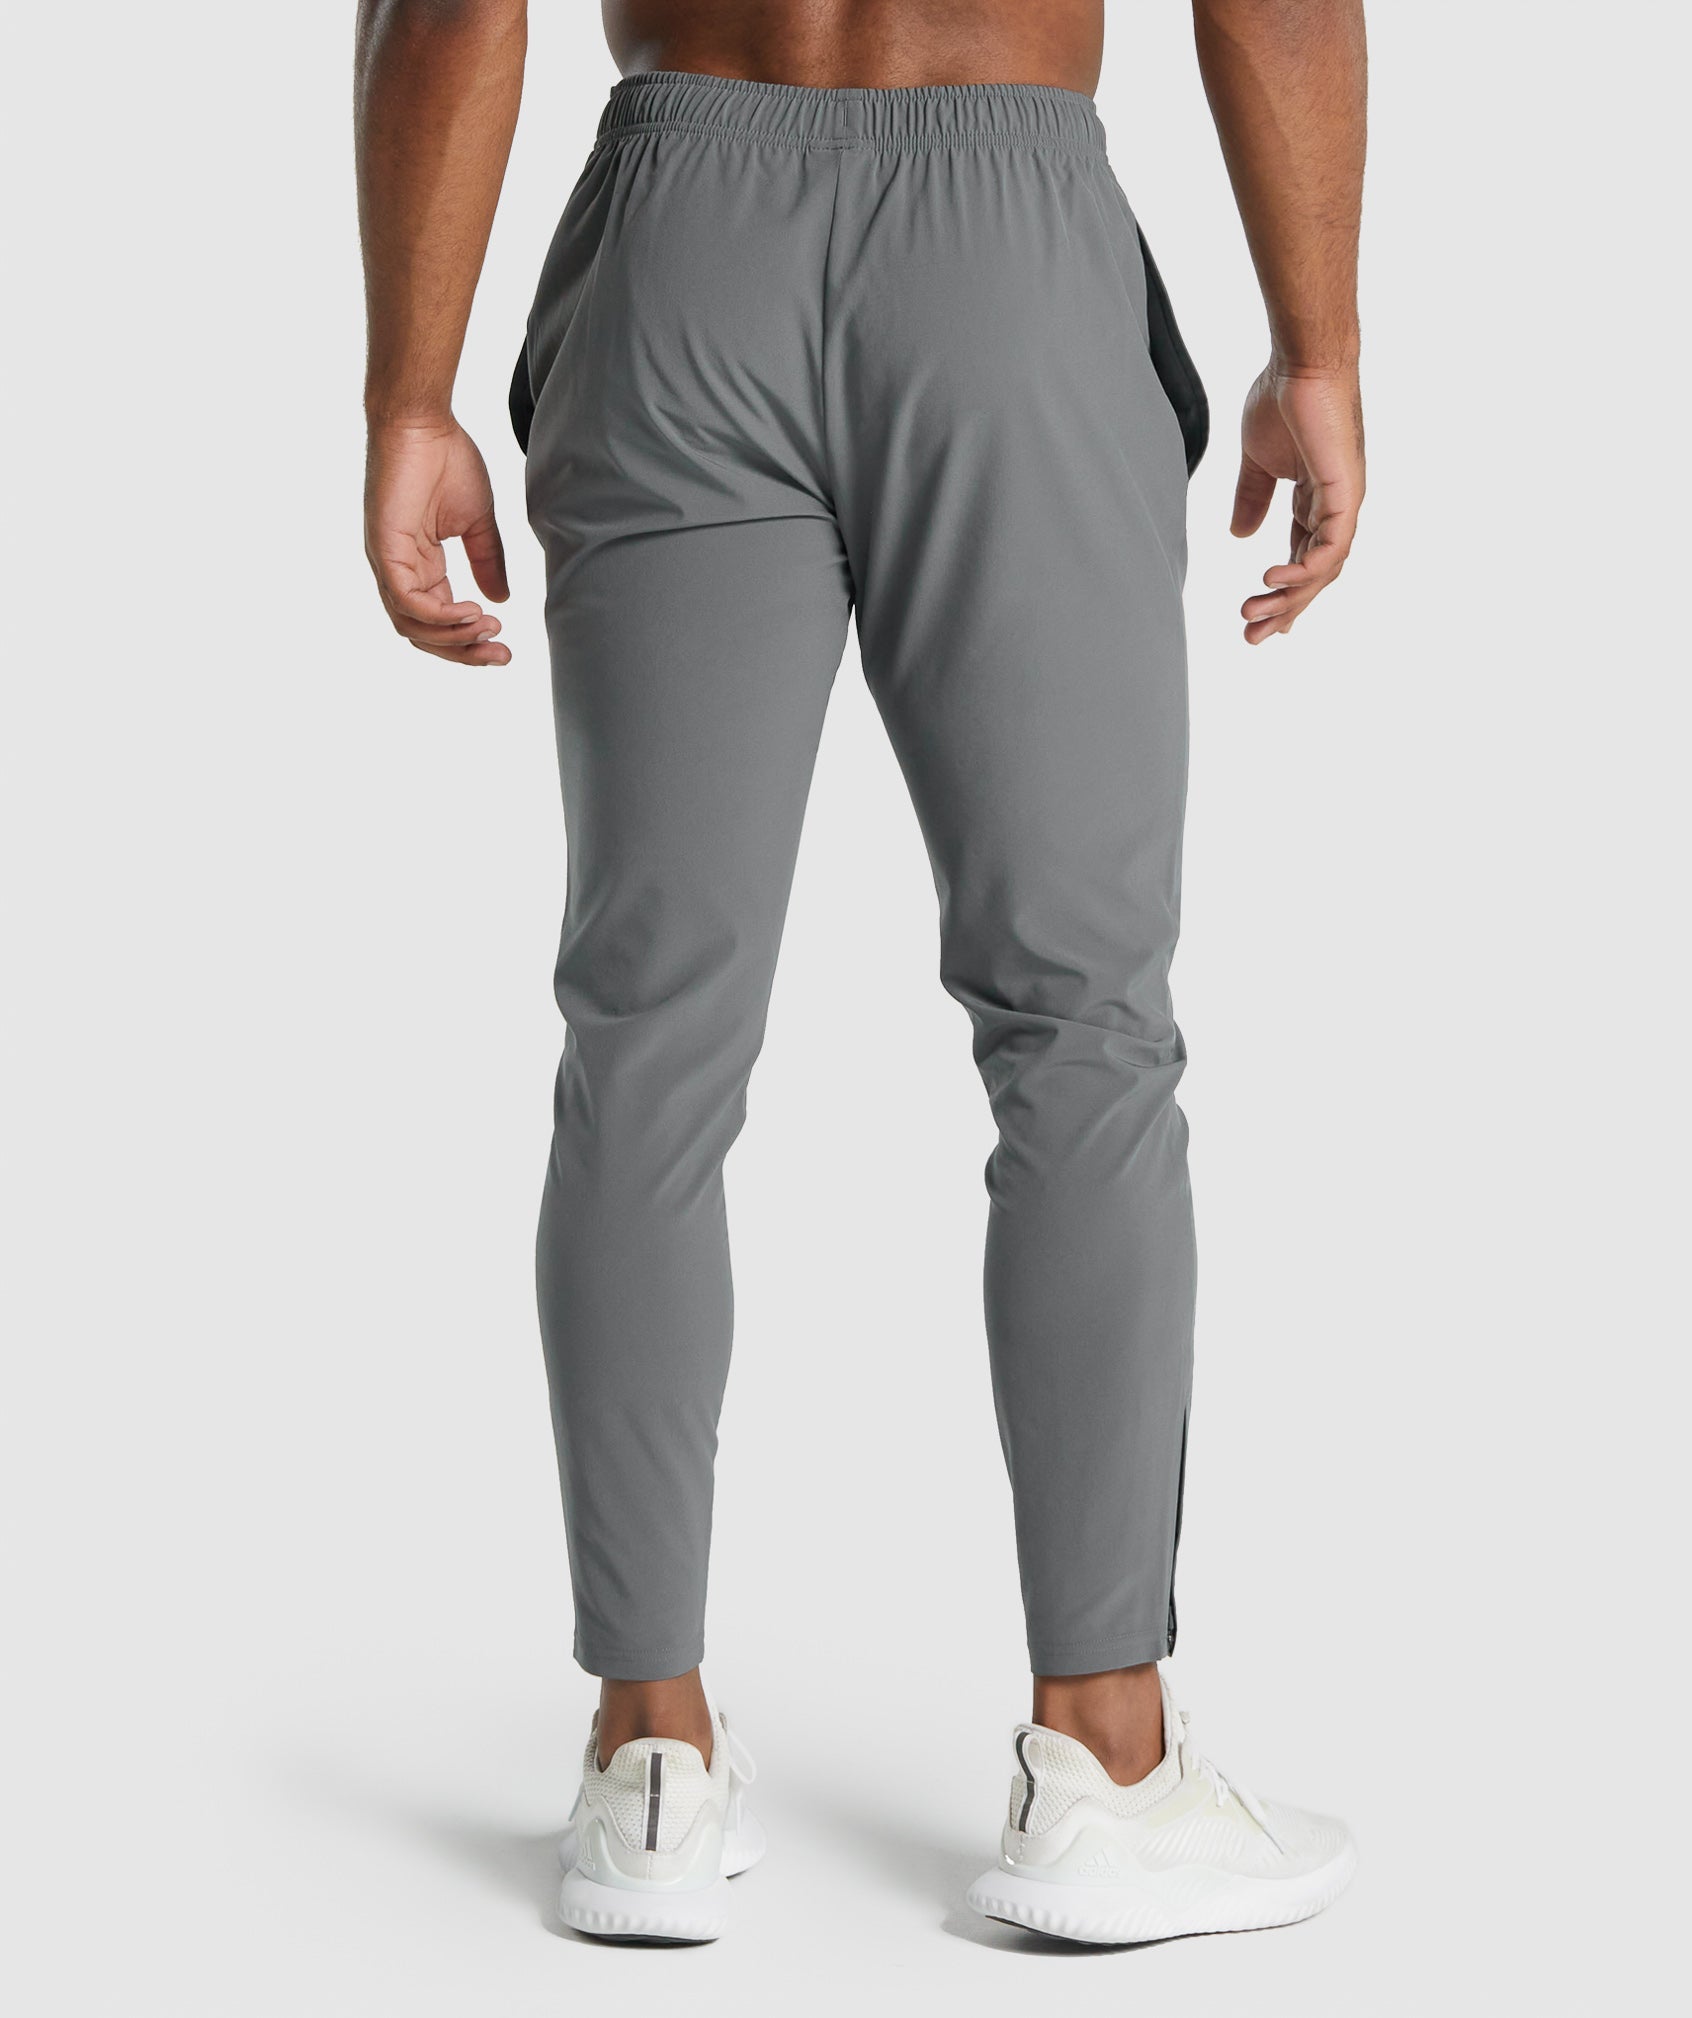 Gymshark Arrival Woven Joggers - Charcoal Grey